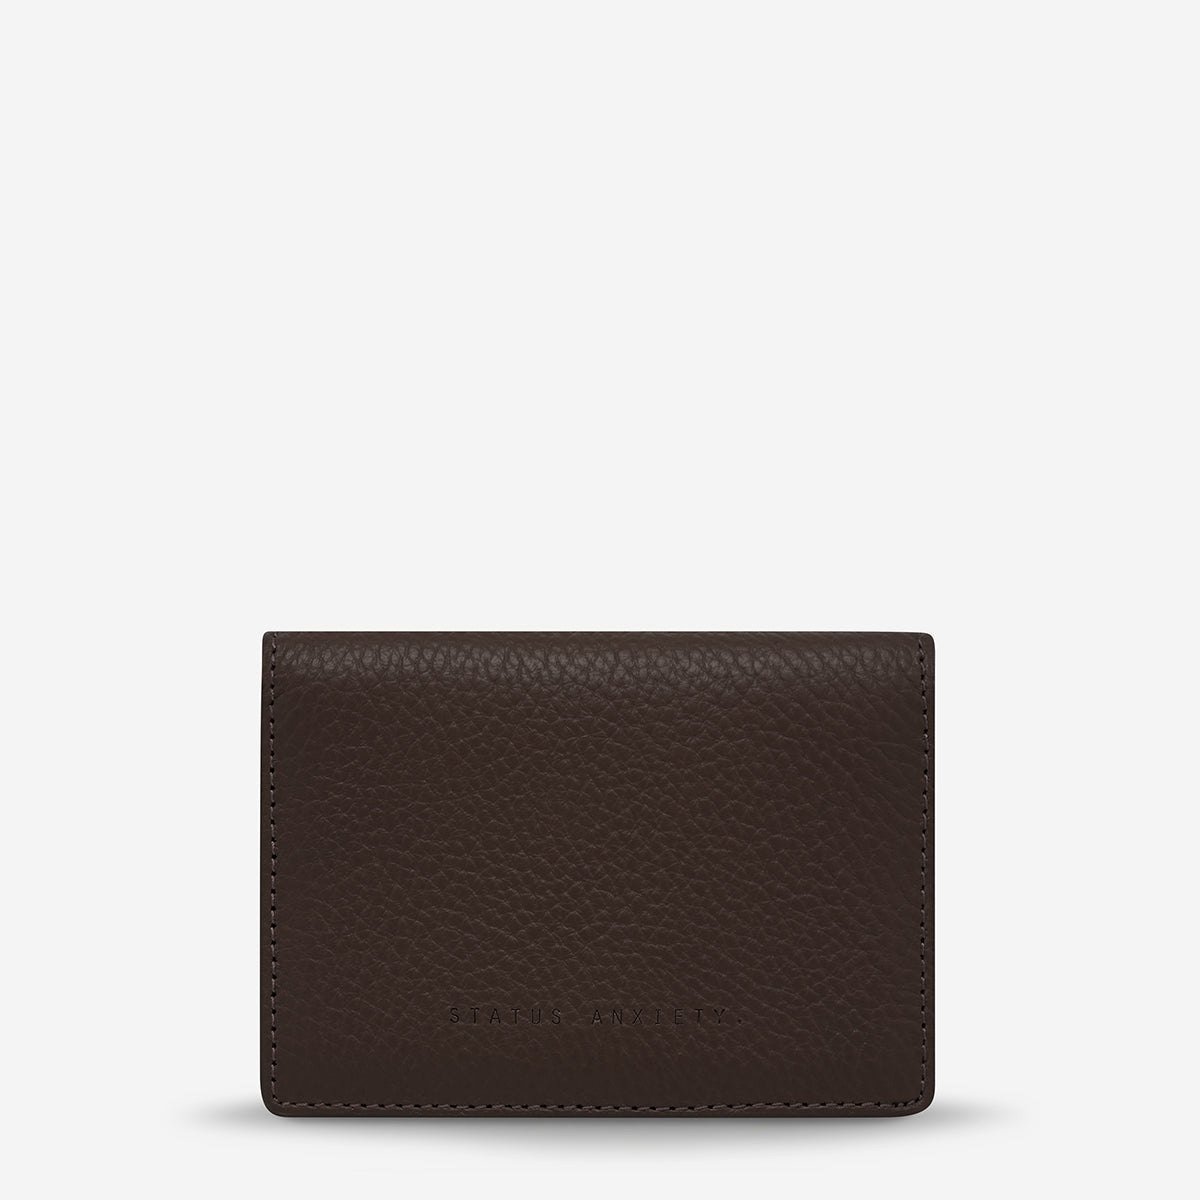 Status Anxiety Easy Does It Women's Leather Wallet Cocoa